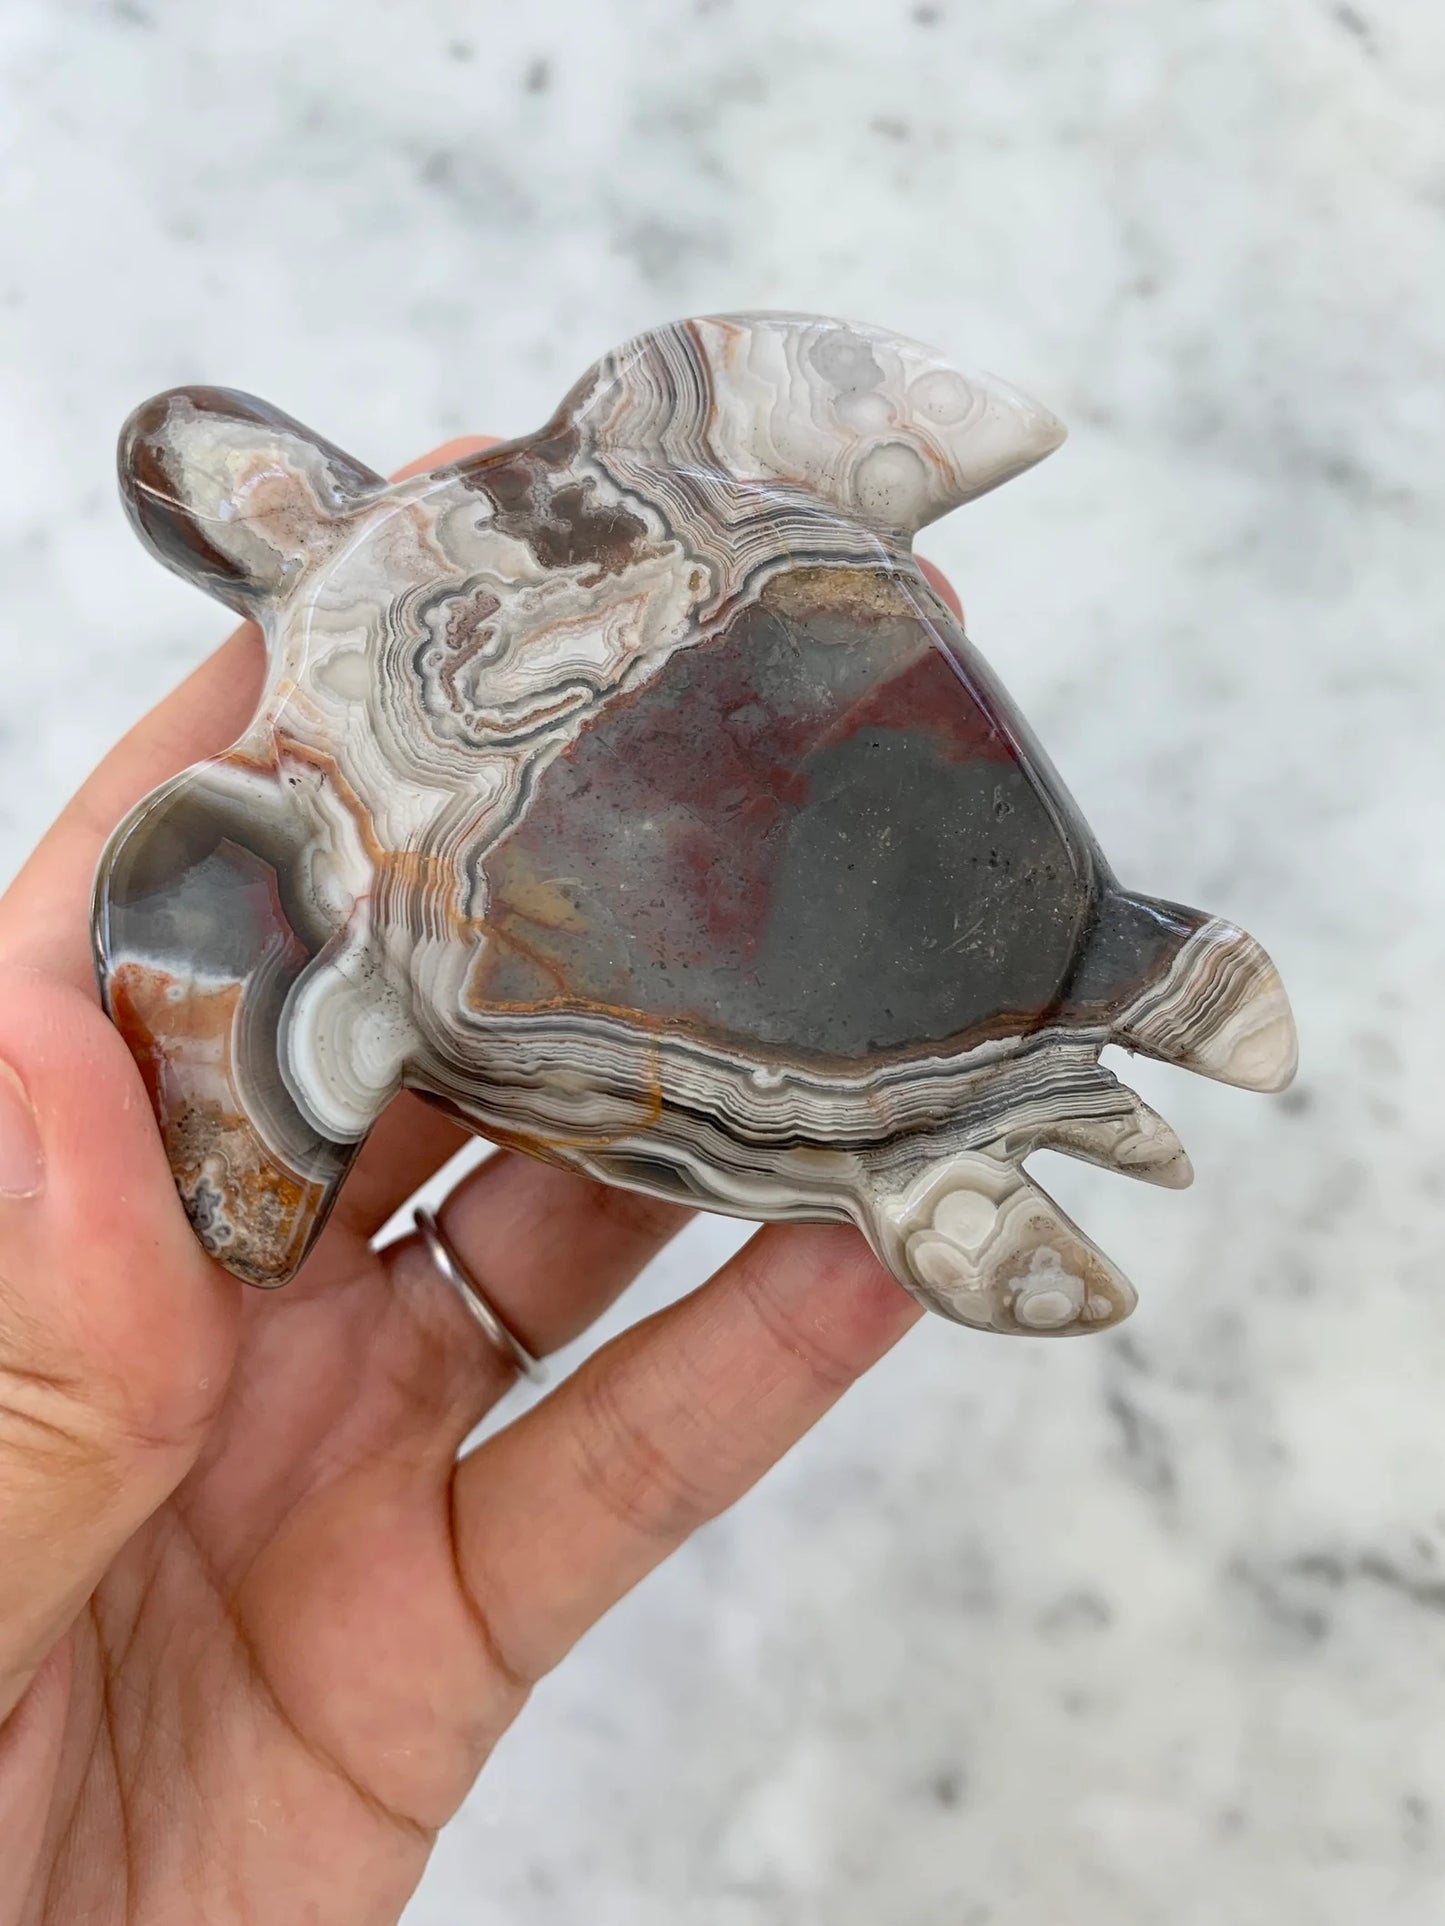 Mexican Crazy Lace Agate Turtle Natural Stone Crystal Carvings, Pink Agate Crystal Healing Gemstone